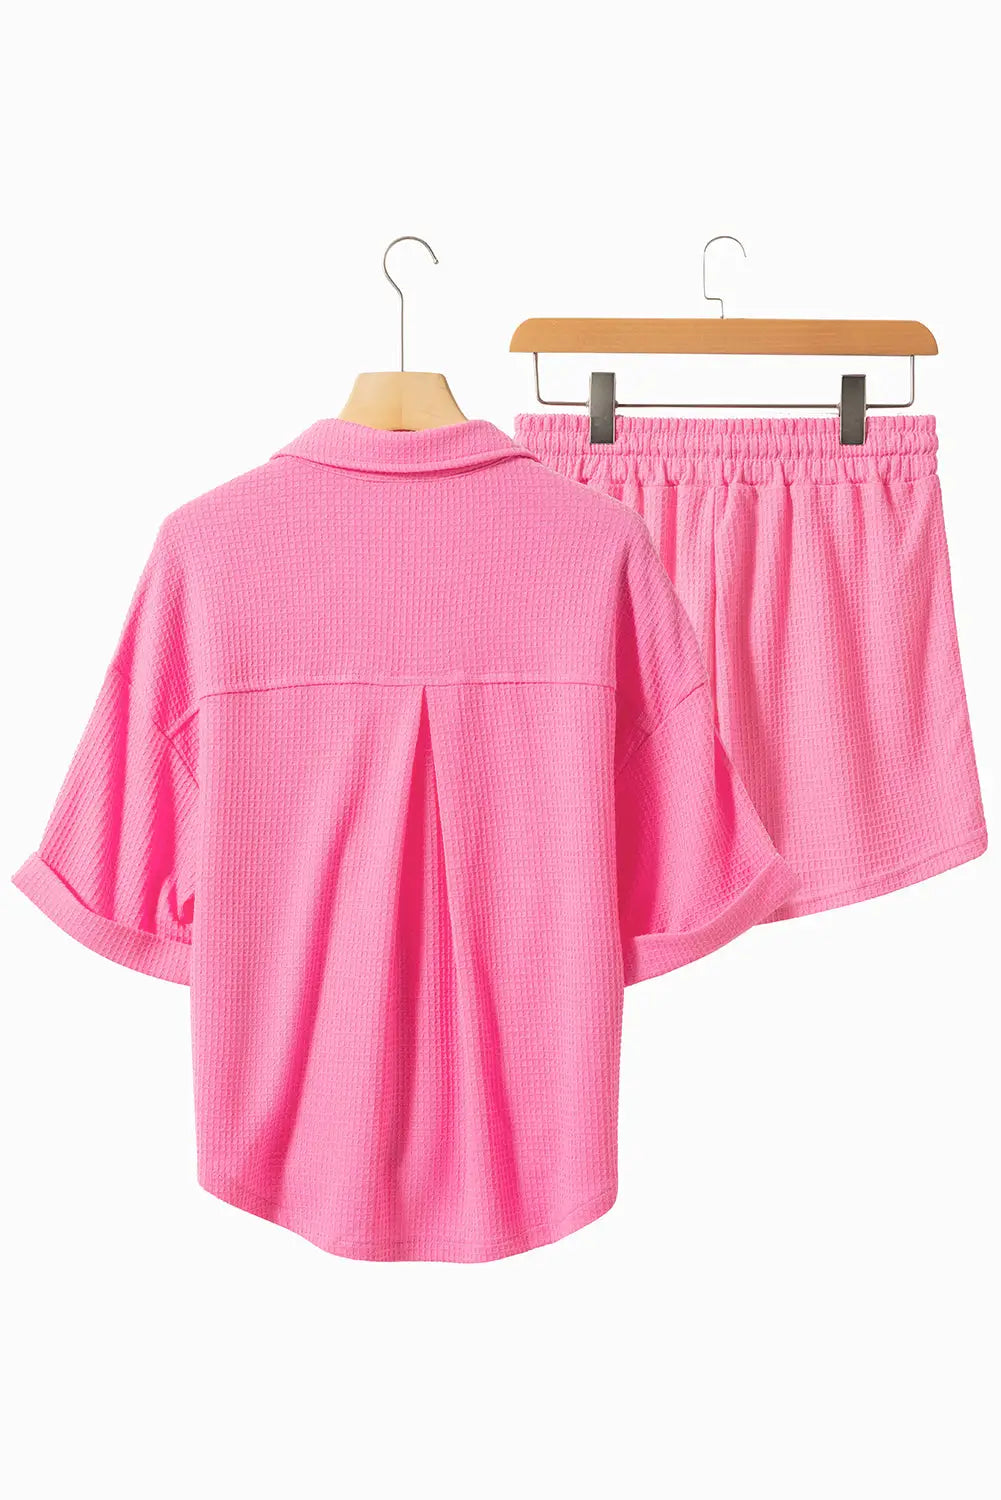 Bright pink textured chest pocket half sleeve shirt shorts outfit - loungewear